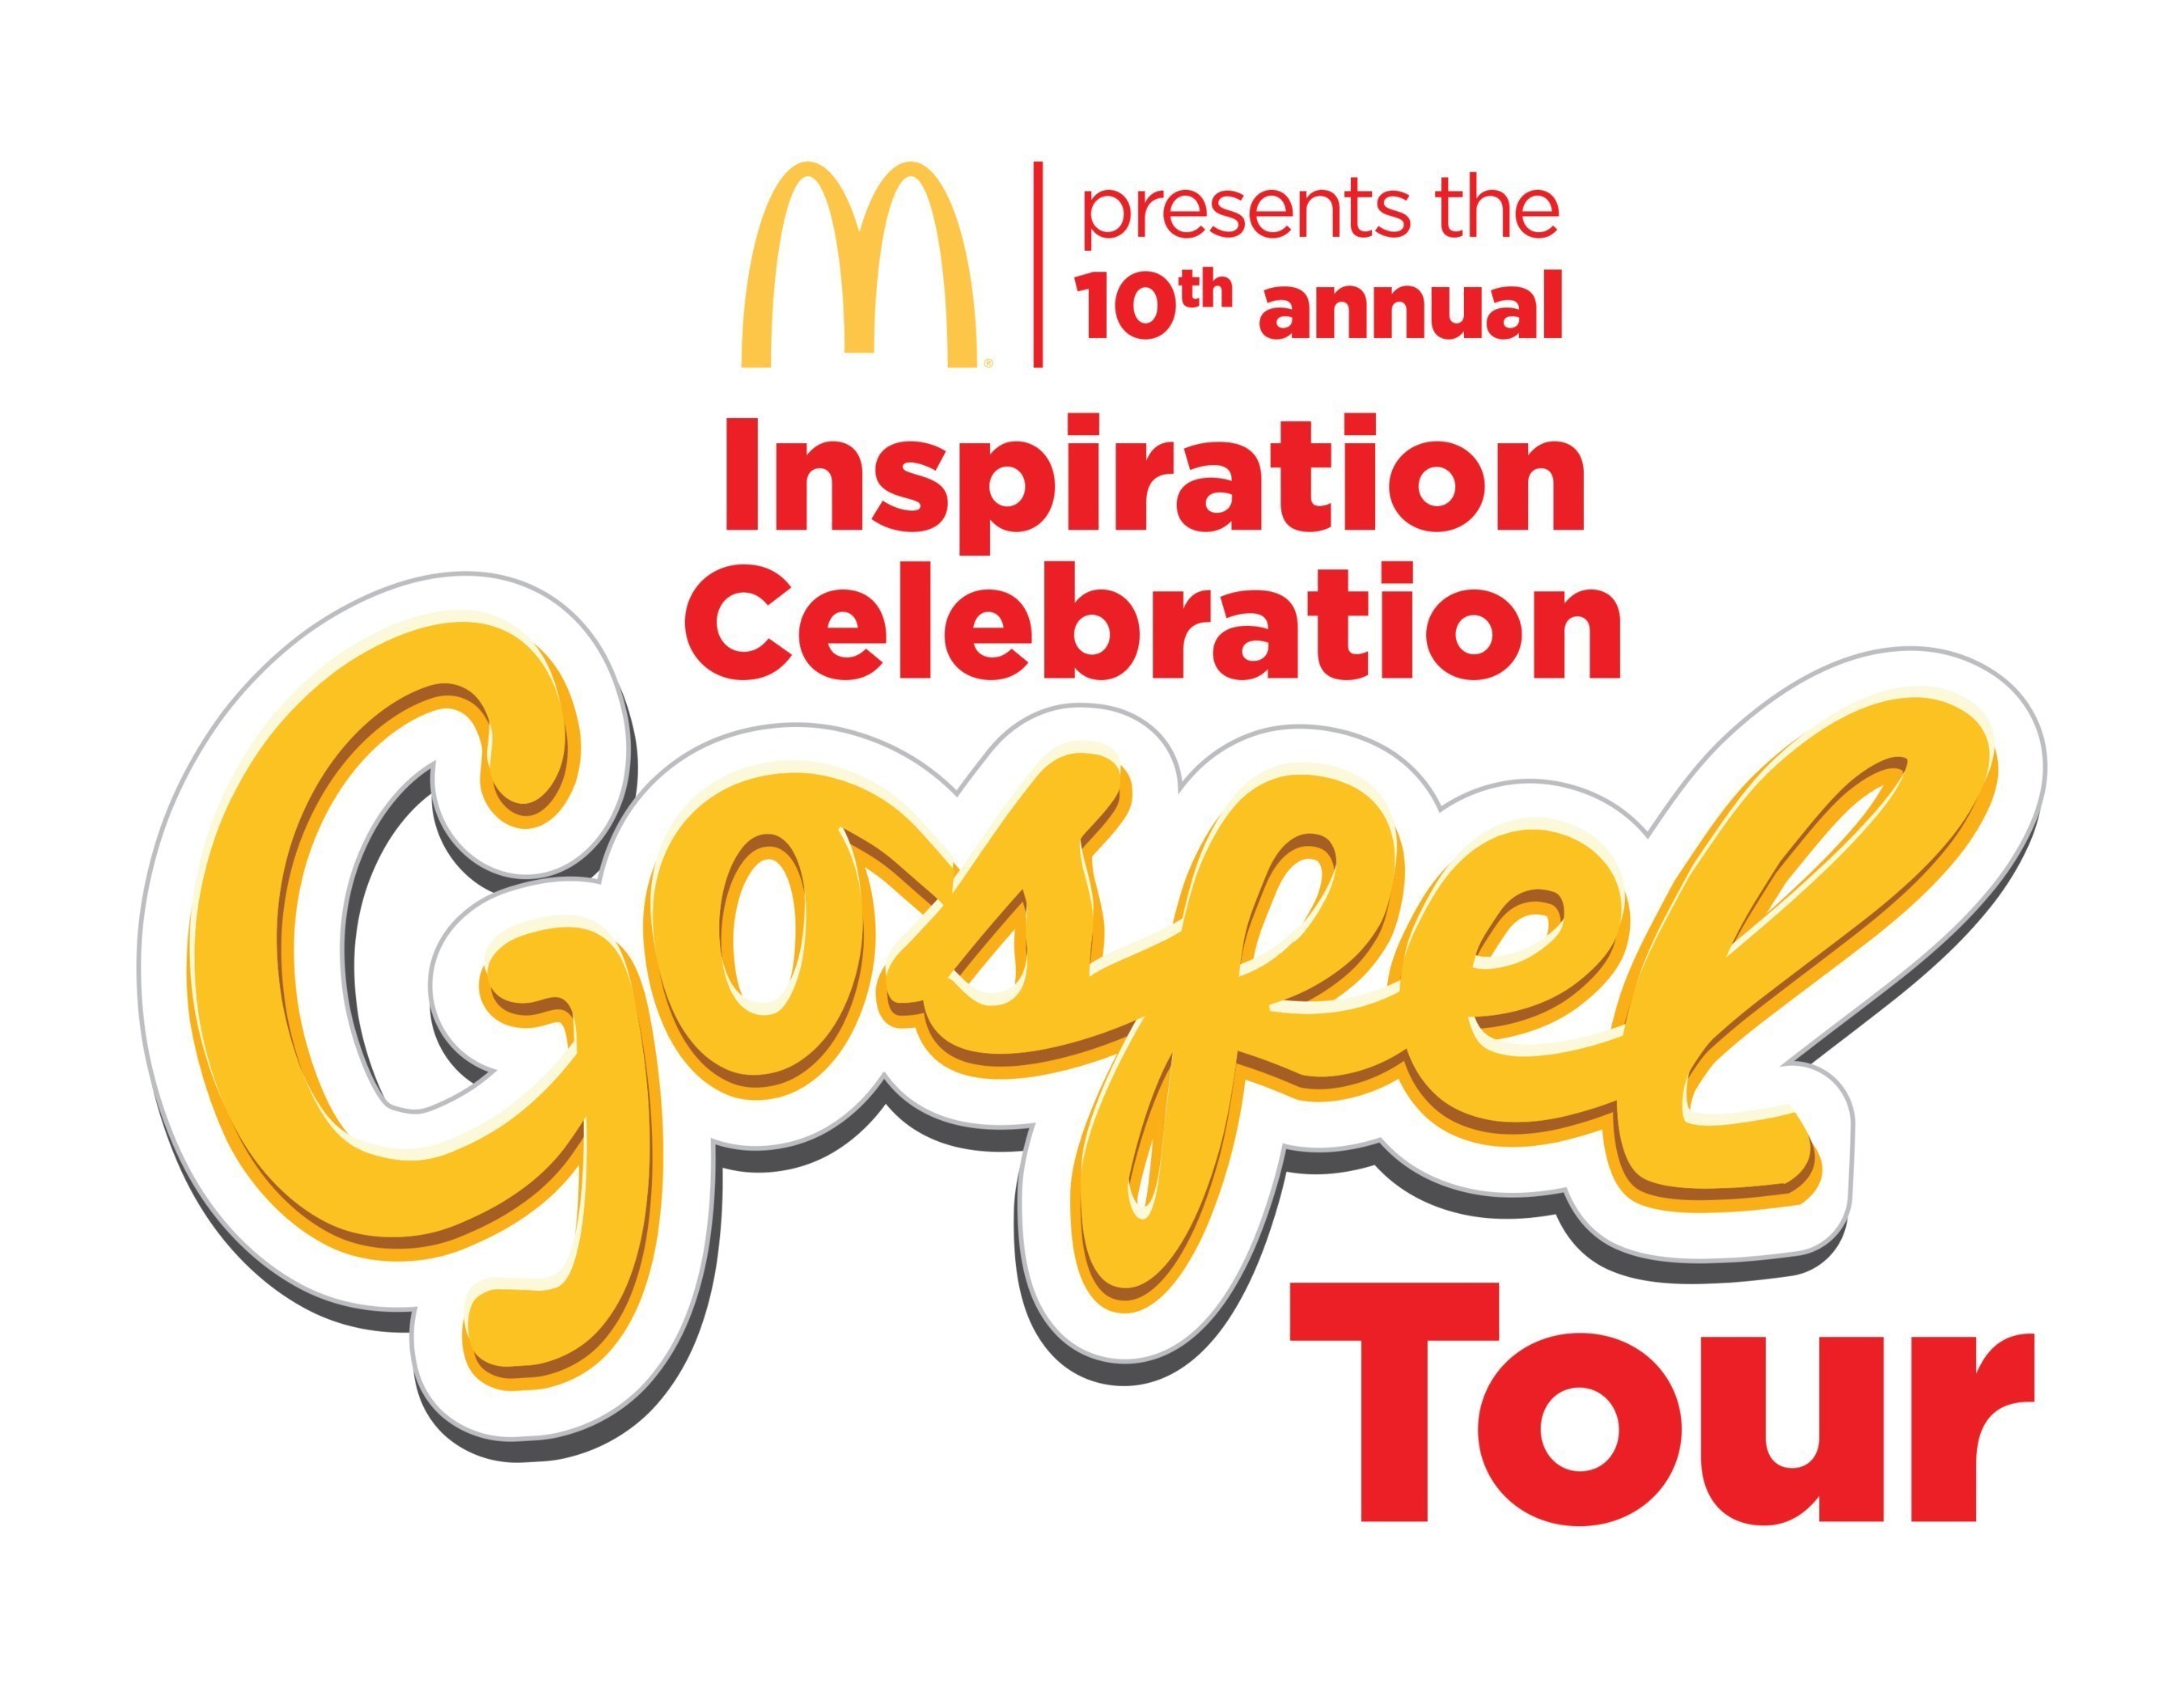 McDonald's Inspiration Celebration Gospel Tour is back and better than ever for the tenth anniversary with gospel music's best artists.